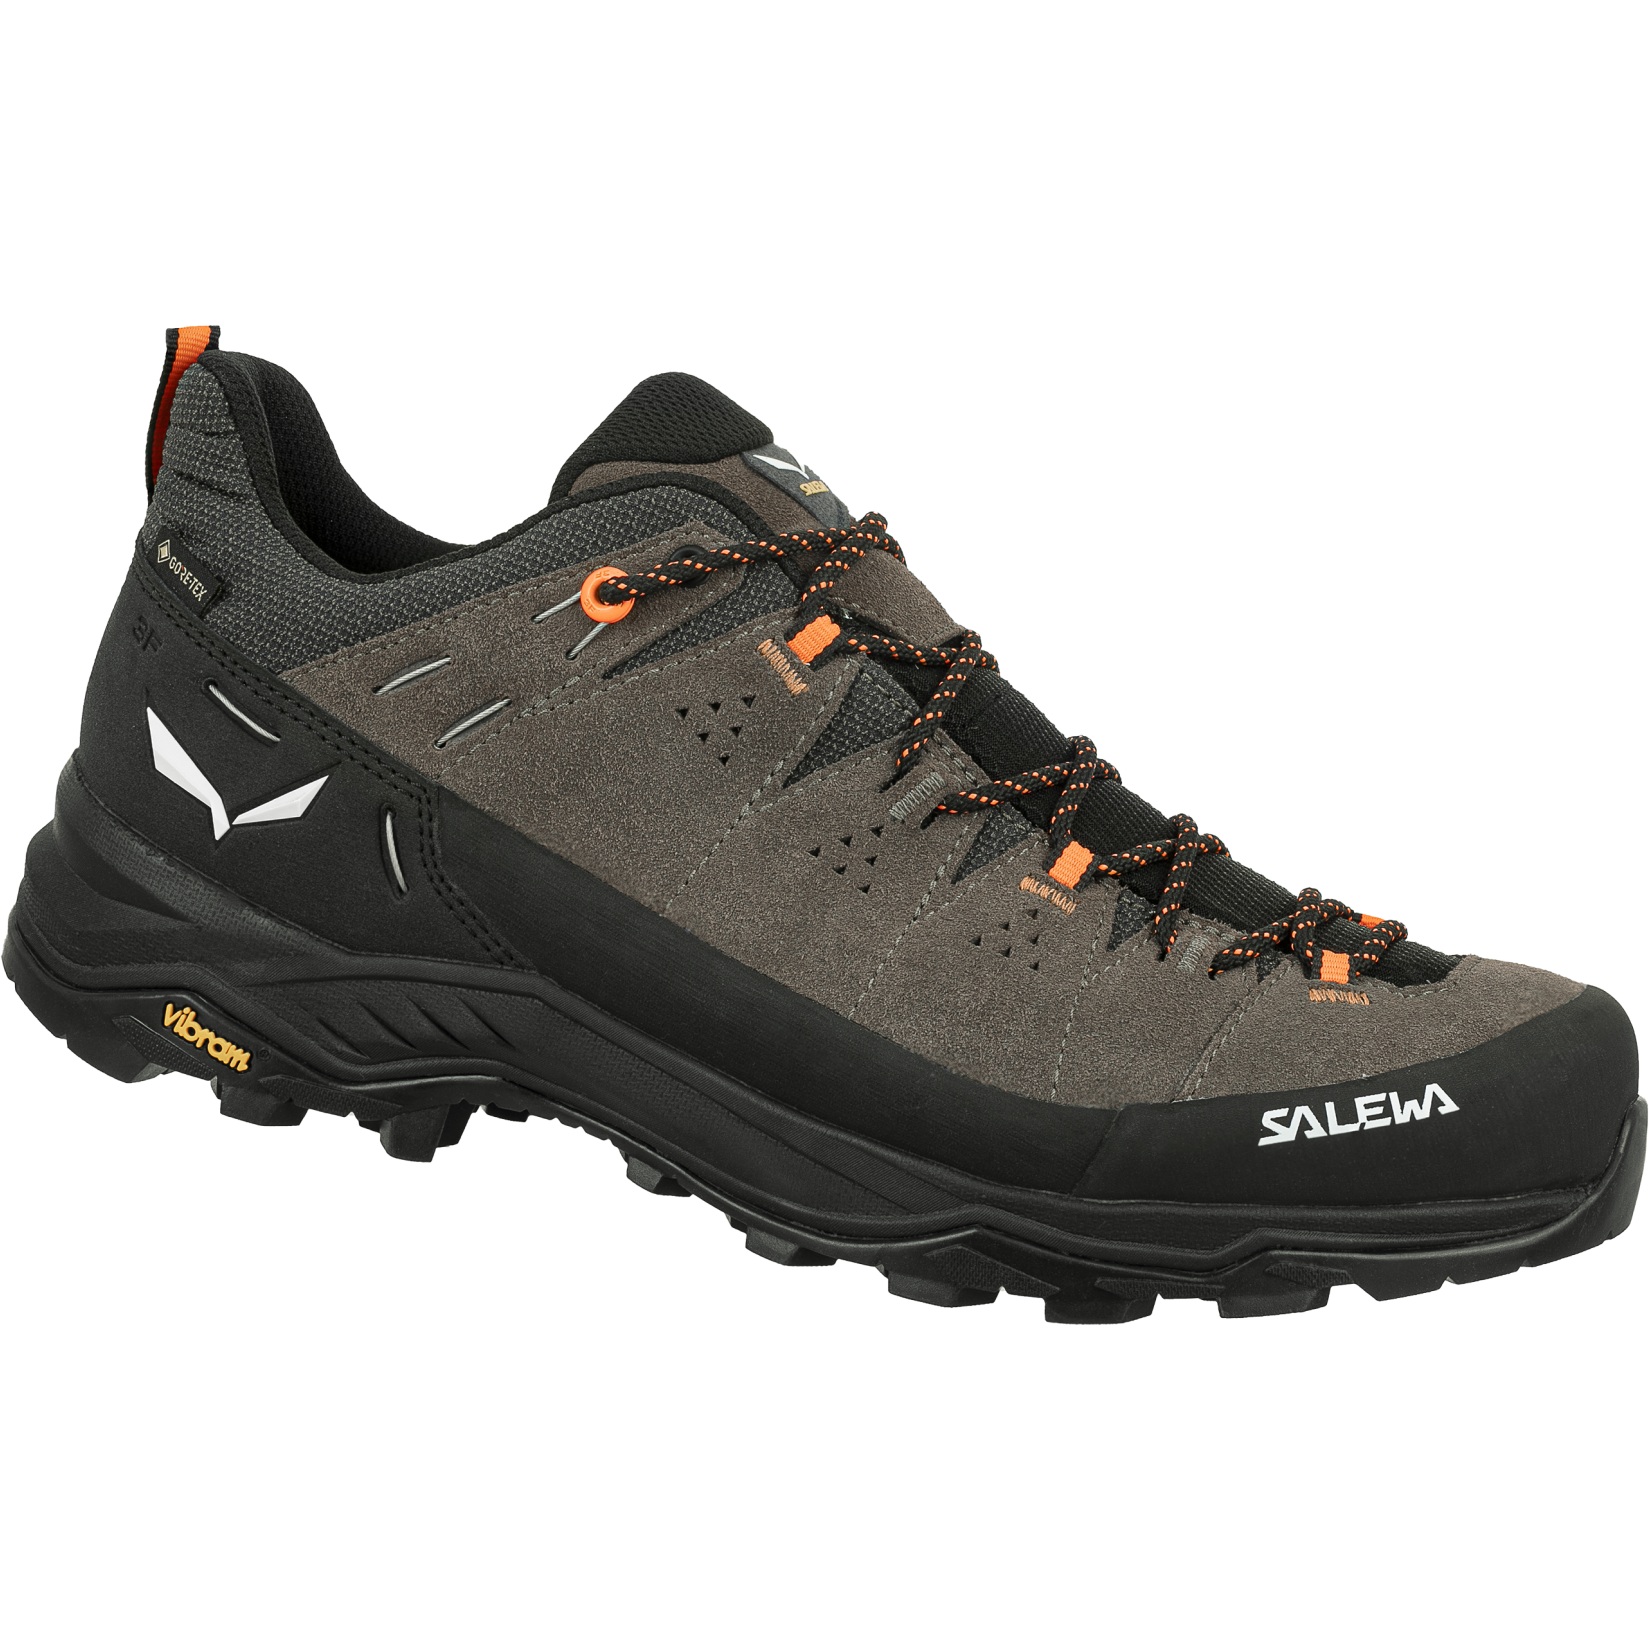 Picture of Salewa Alp Trainer 2 GTX Hiking Shoes Men - bungee cord/black 7953